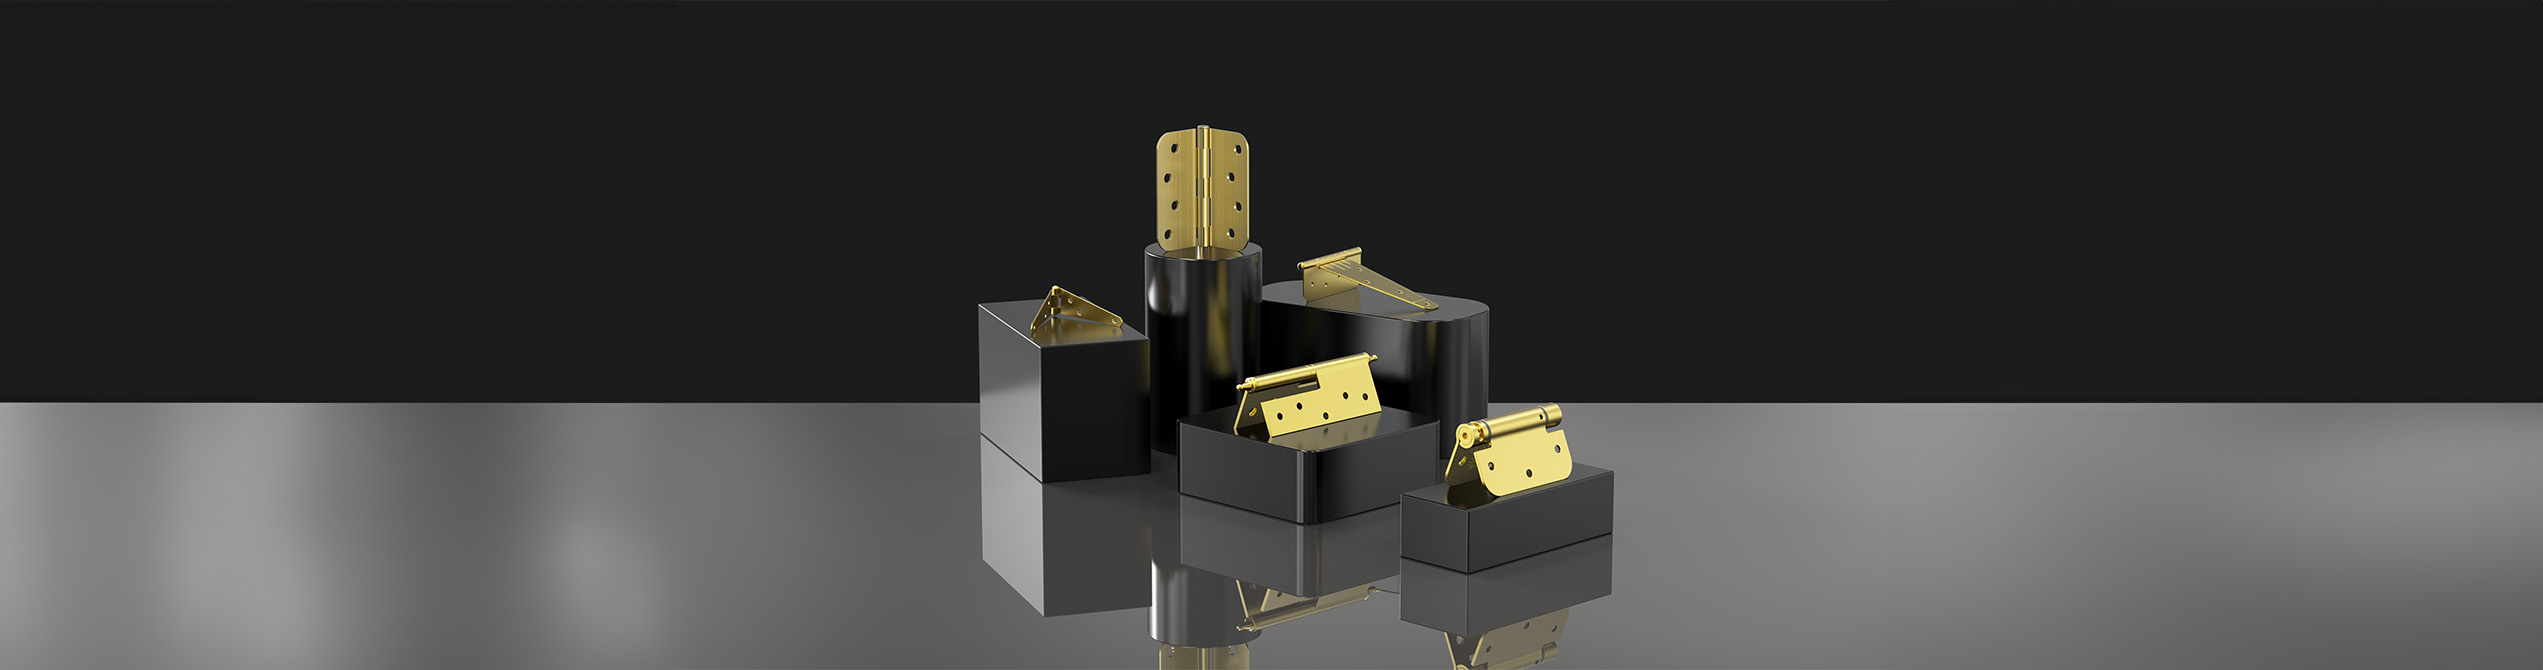 About Tendency (TDC): Expert in Gold Hinges Manufacturing